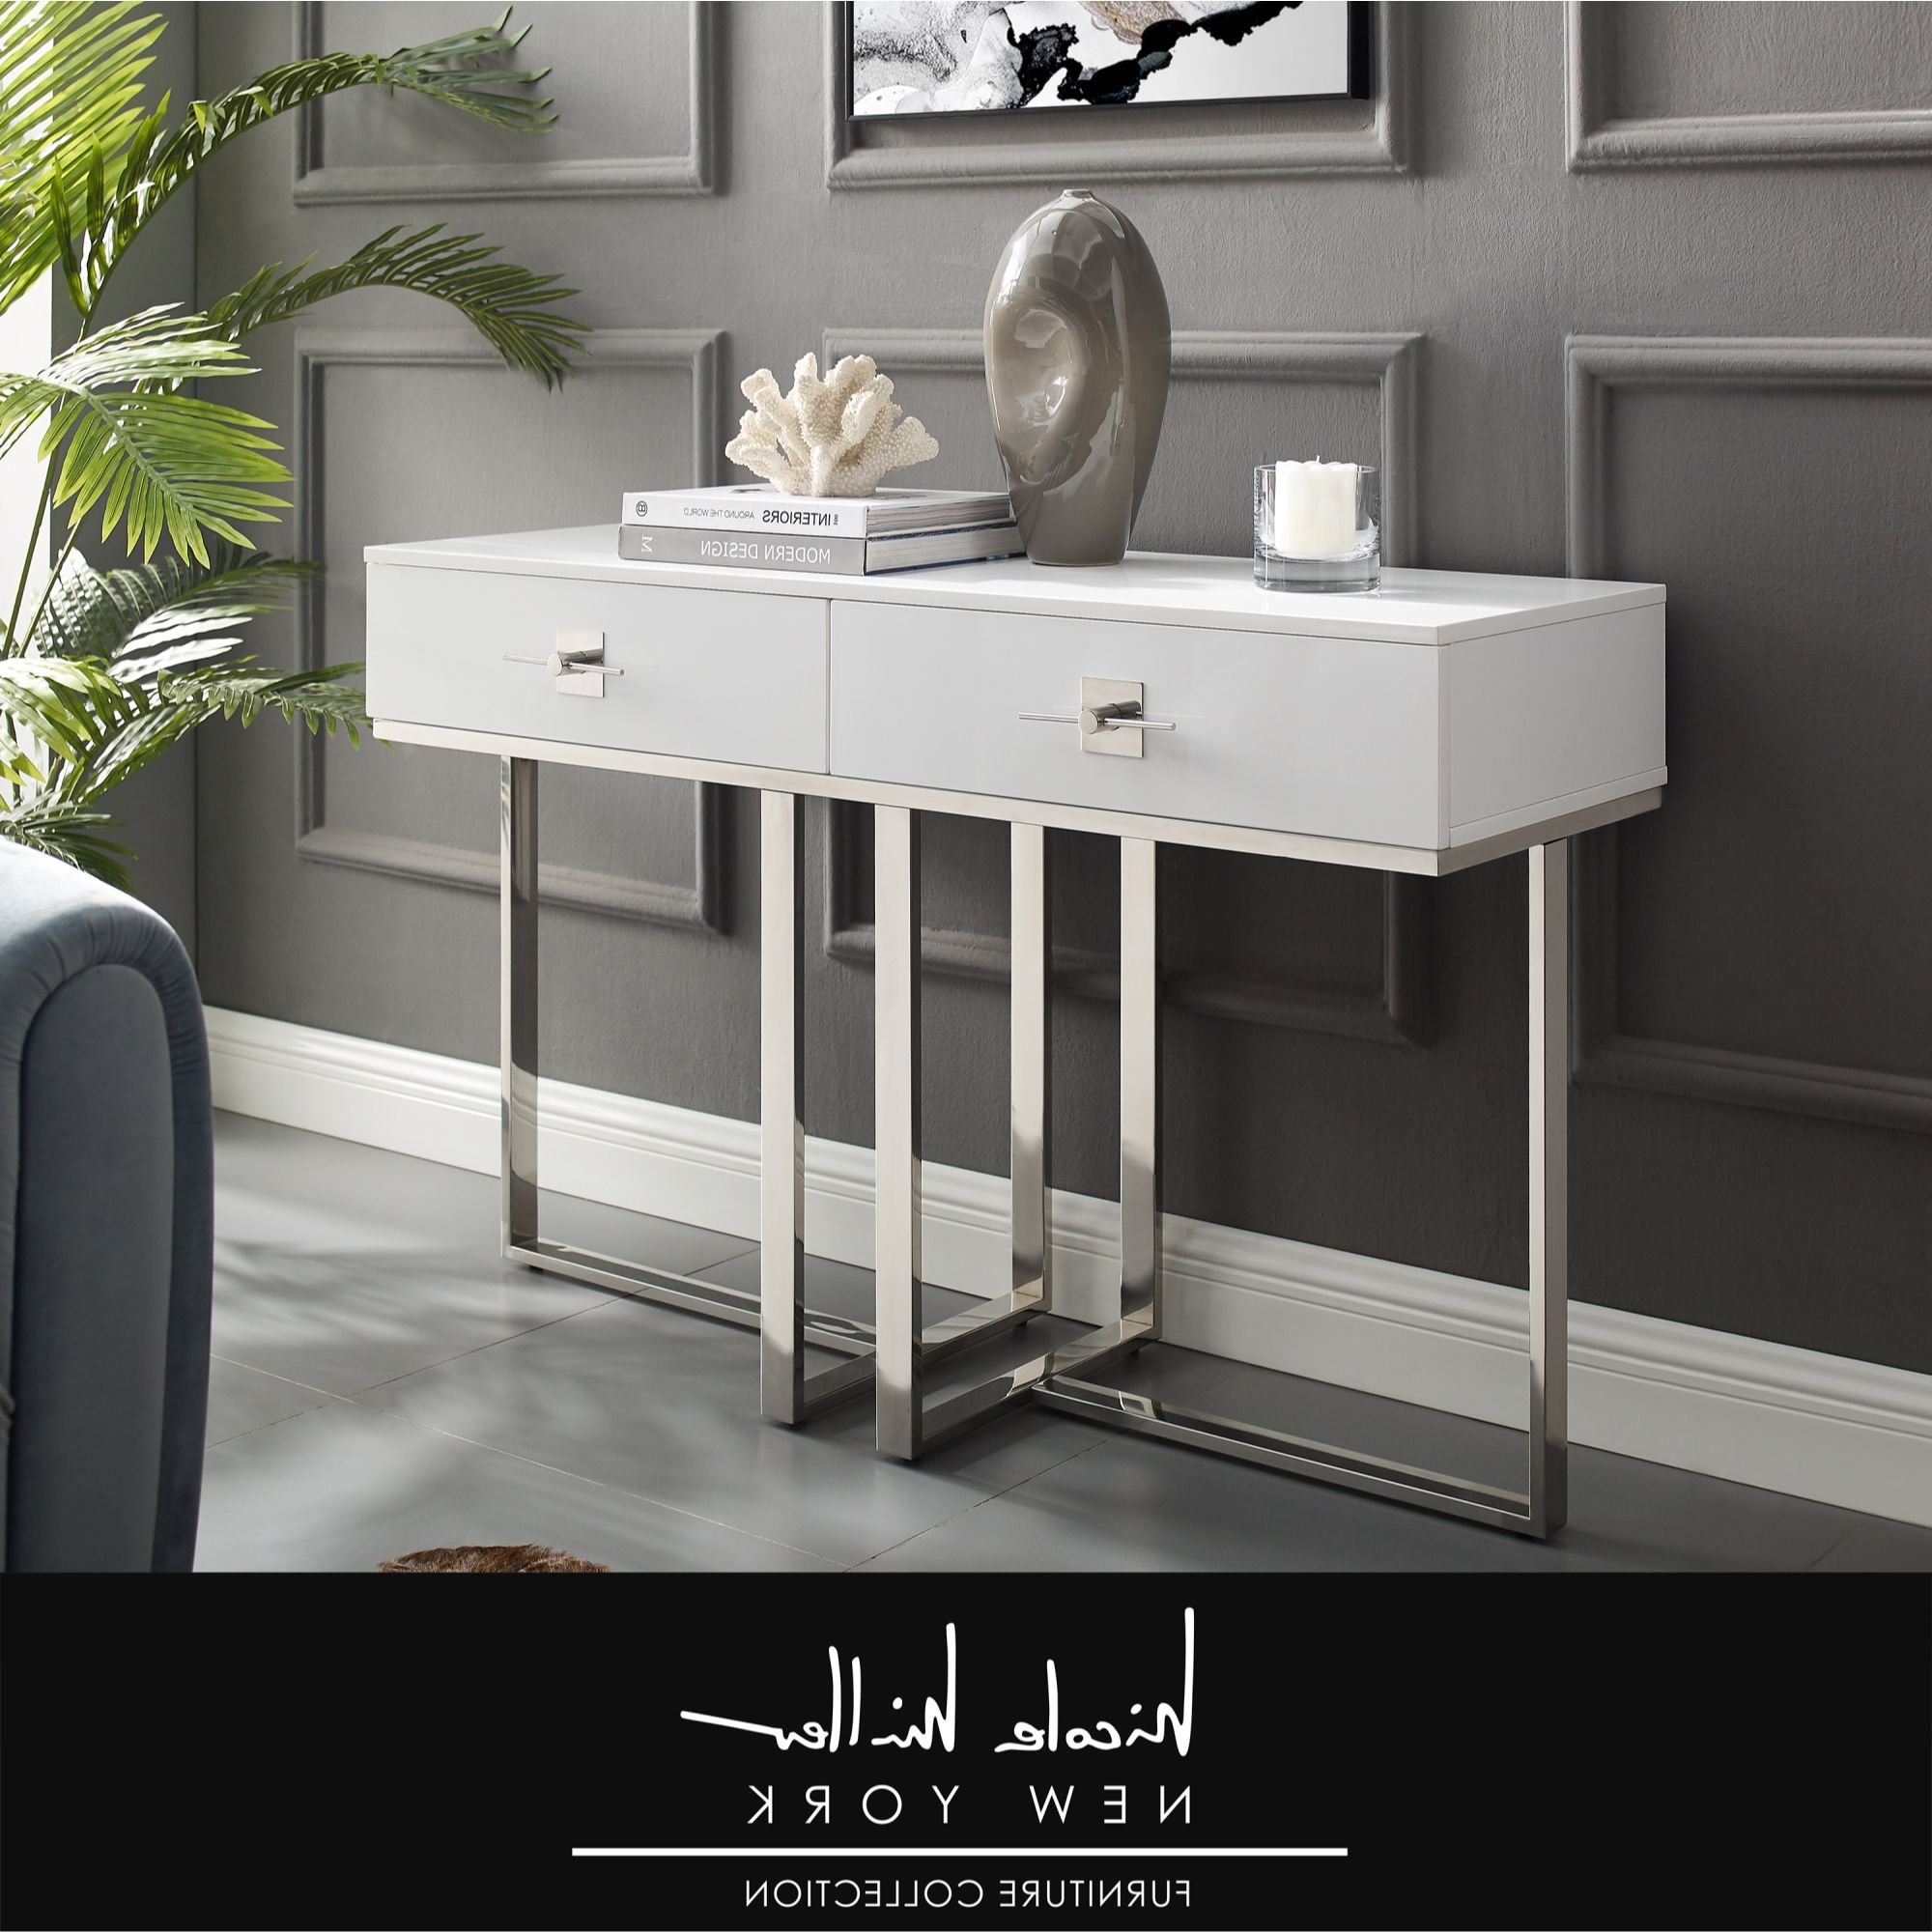 Recent Nicole Miller Meli Console Table 2 Drawers Hight Gloss Throughout Chrome Console Tables (View 3 of 10)